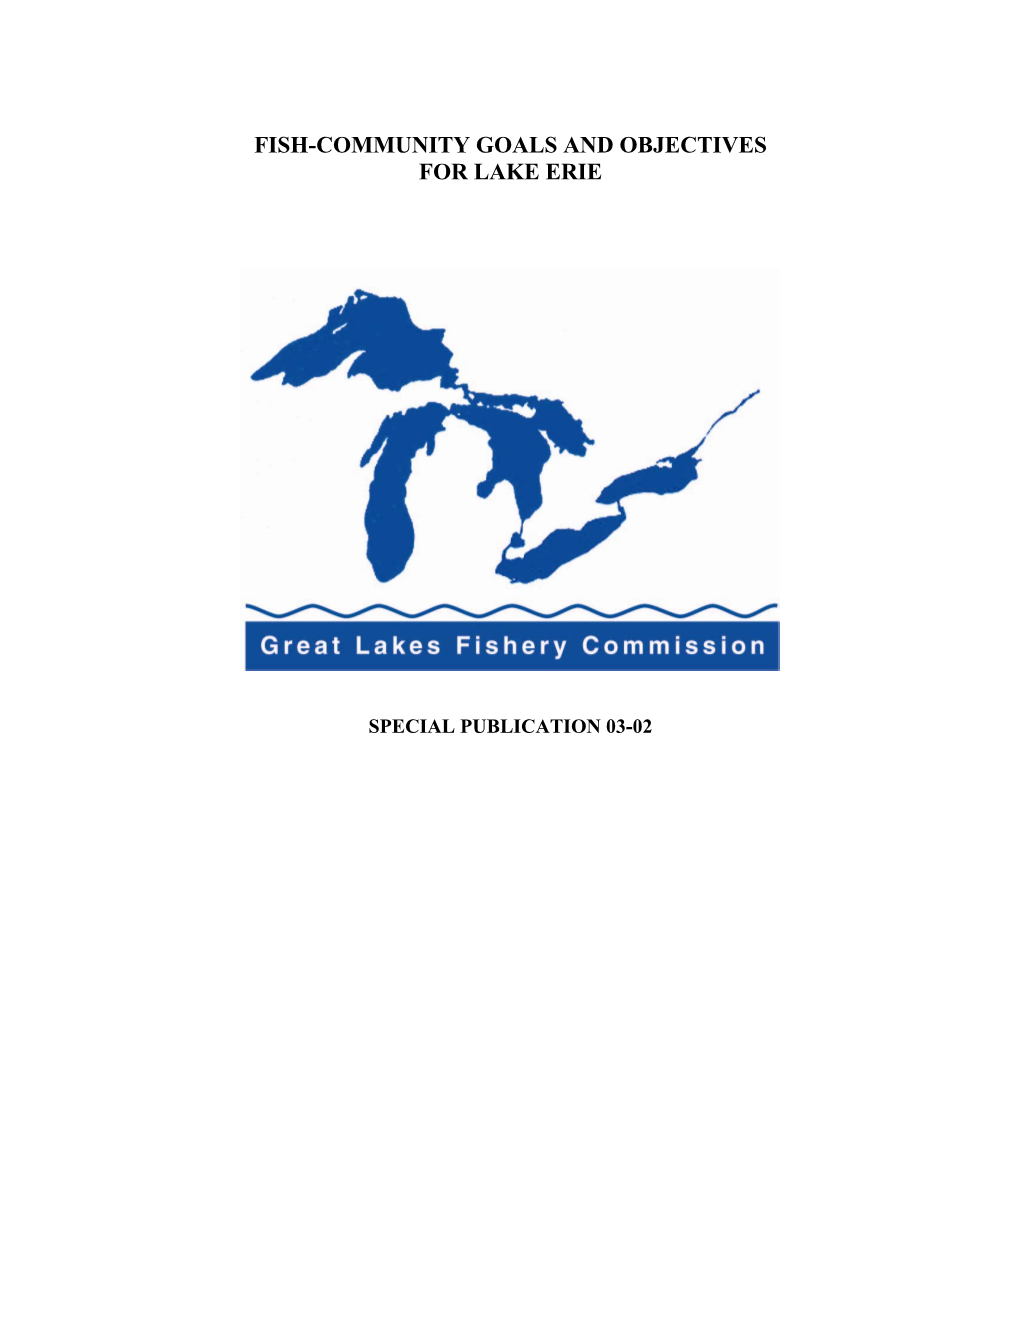 Fish-Community Goals and Objectives for Lake Erie